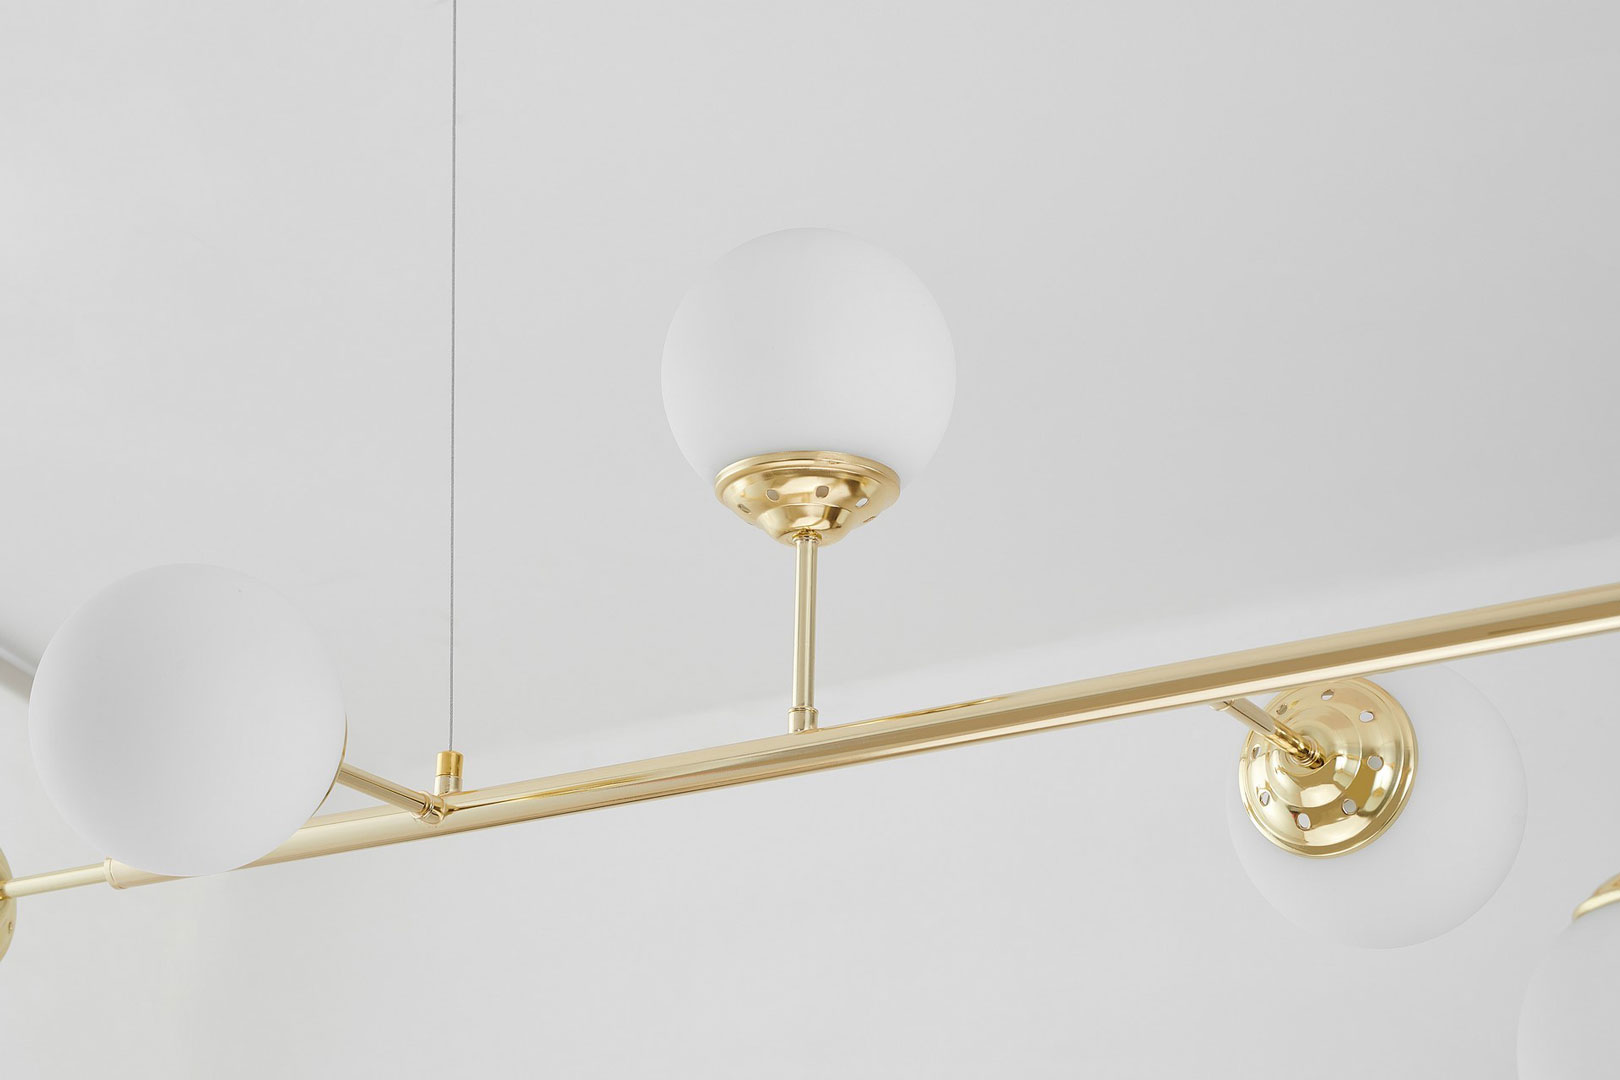 Gold chandelier, spherical shades, pendant lamp, horizontal tube, two round rosettes, classic gold - FINO - Lampit image 3